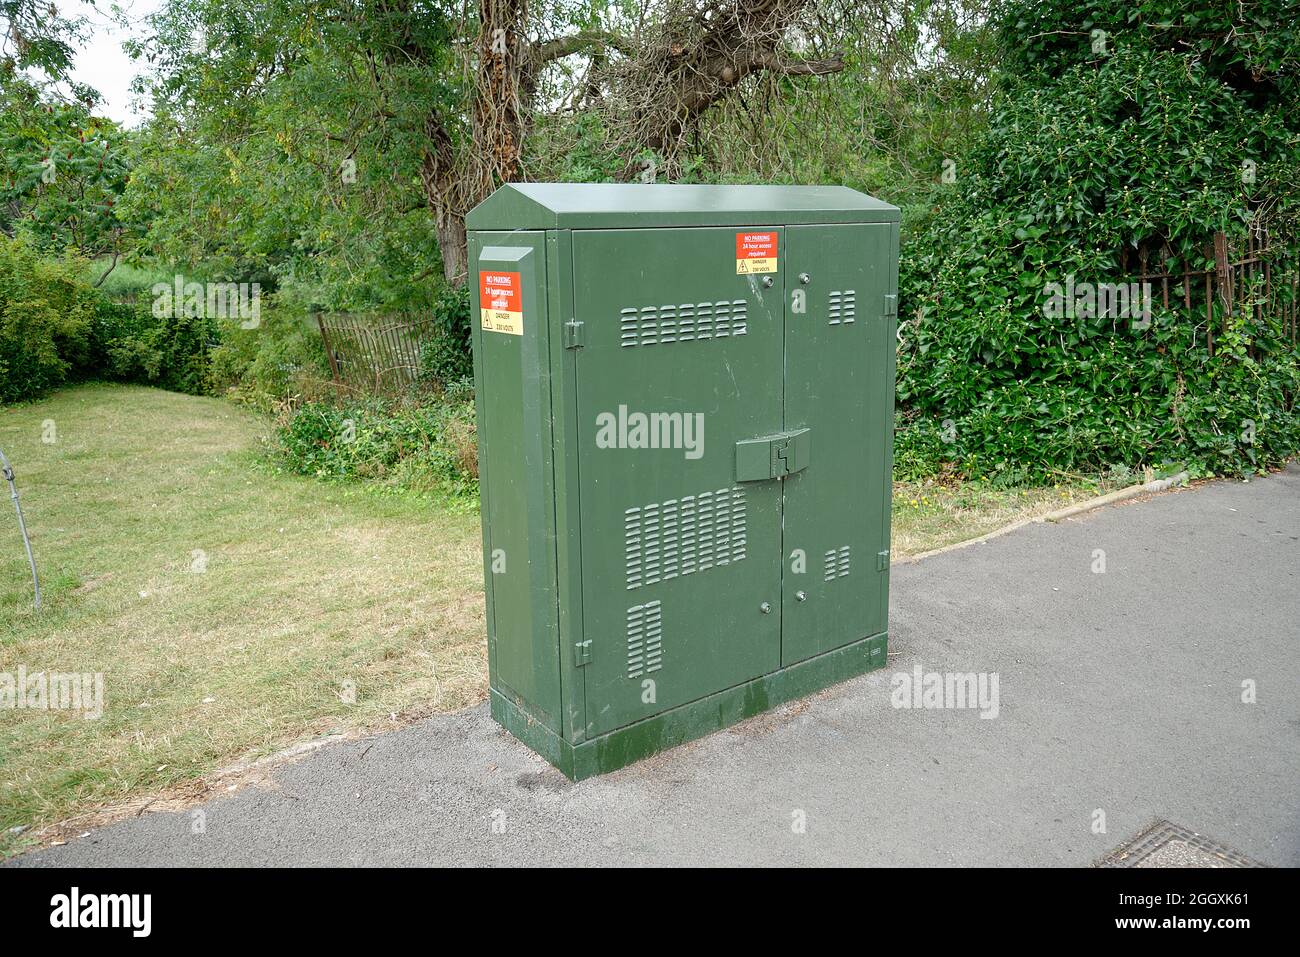 Green telecom switch housing boxes. Street cabinets with fibre optic and copper telephone/broadband lines. Stock Photo